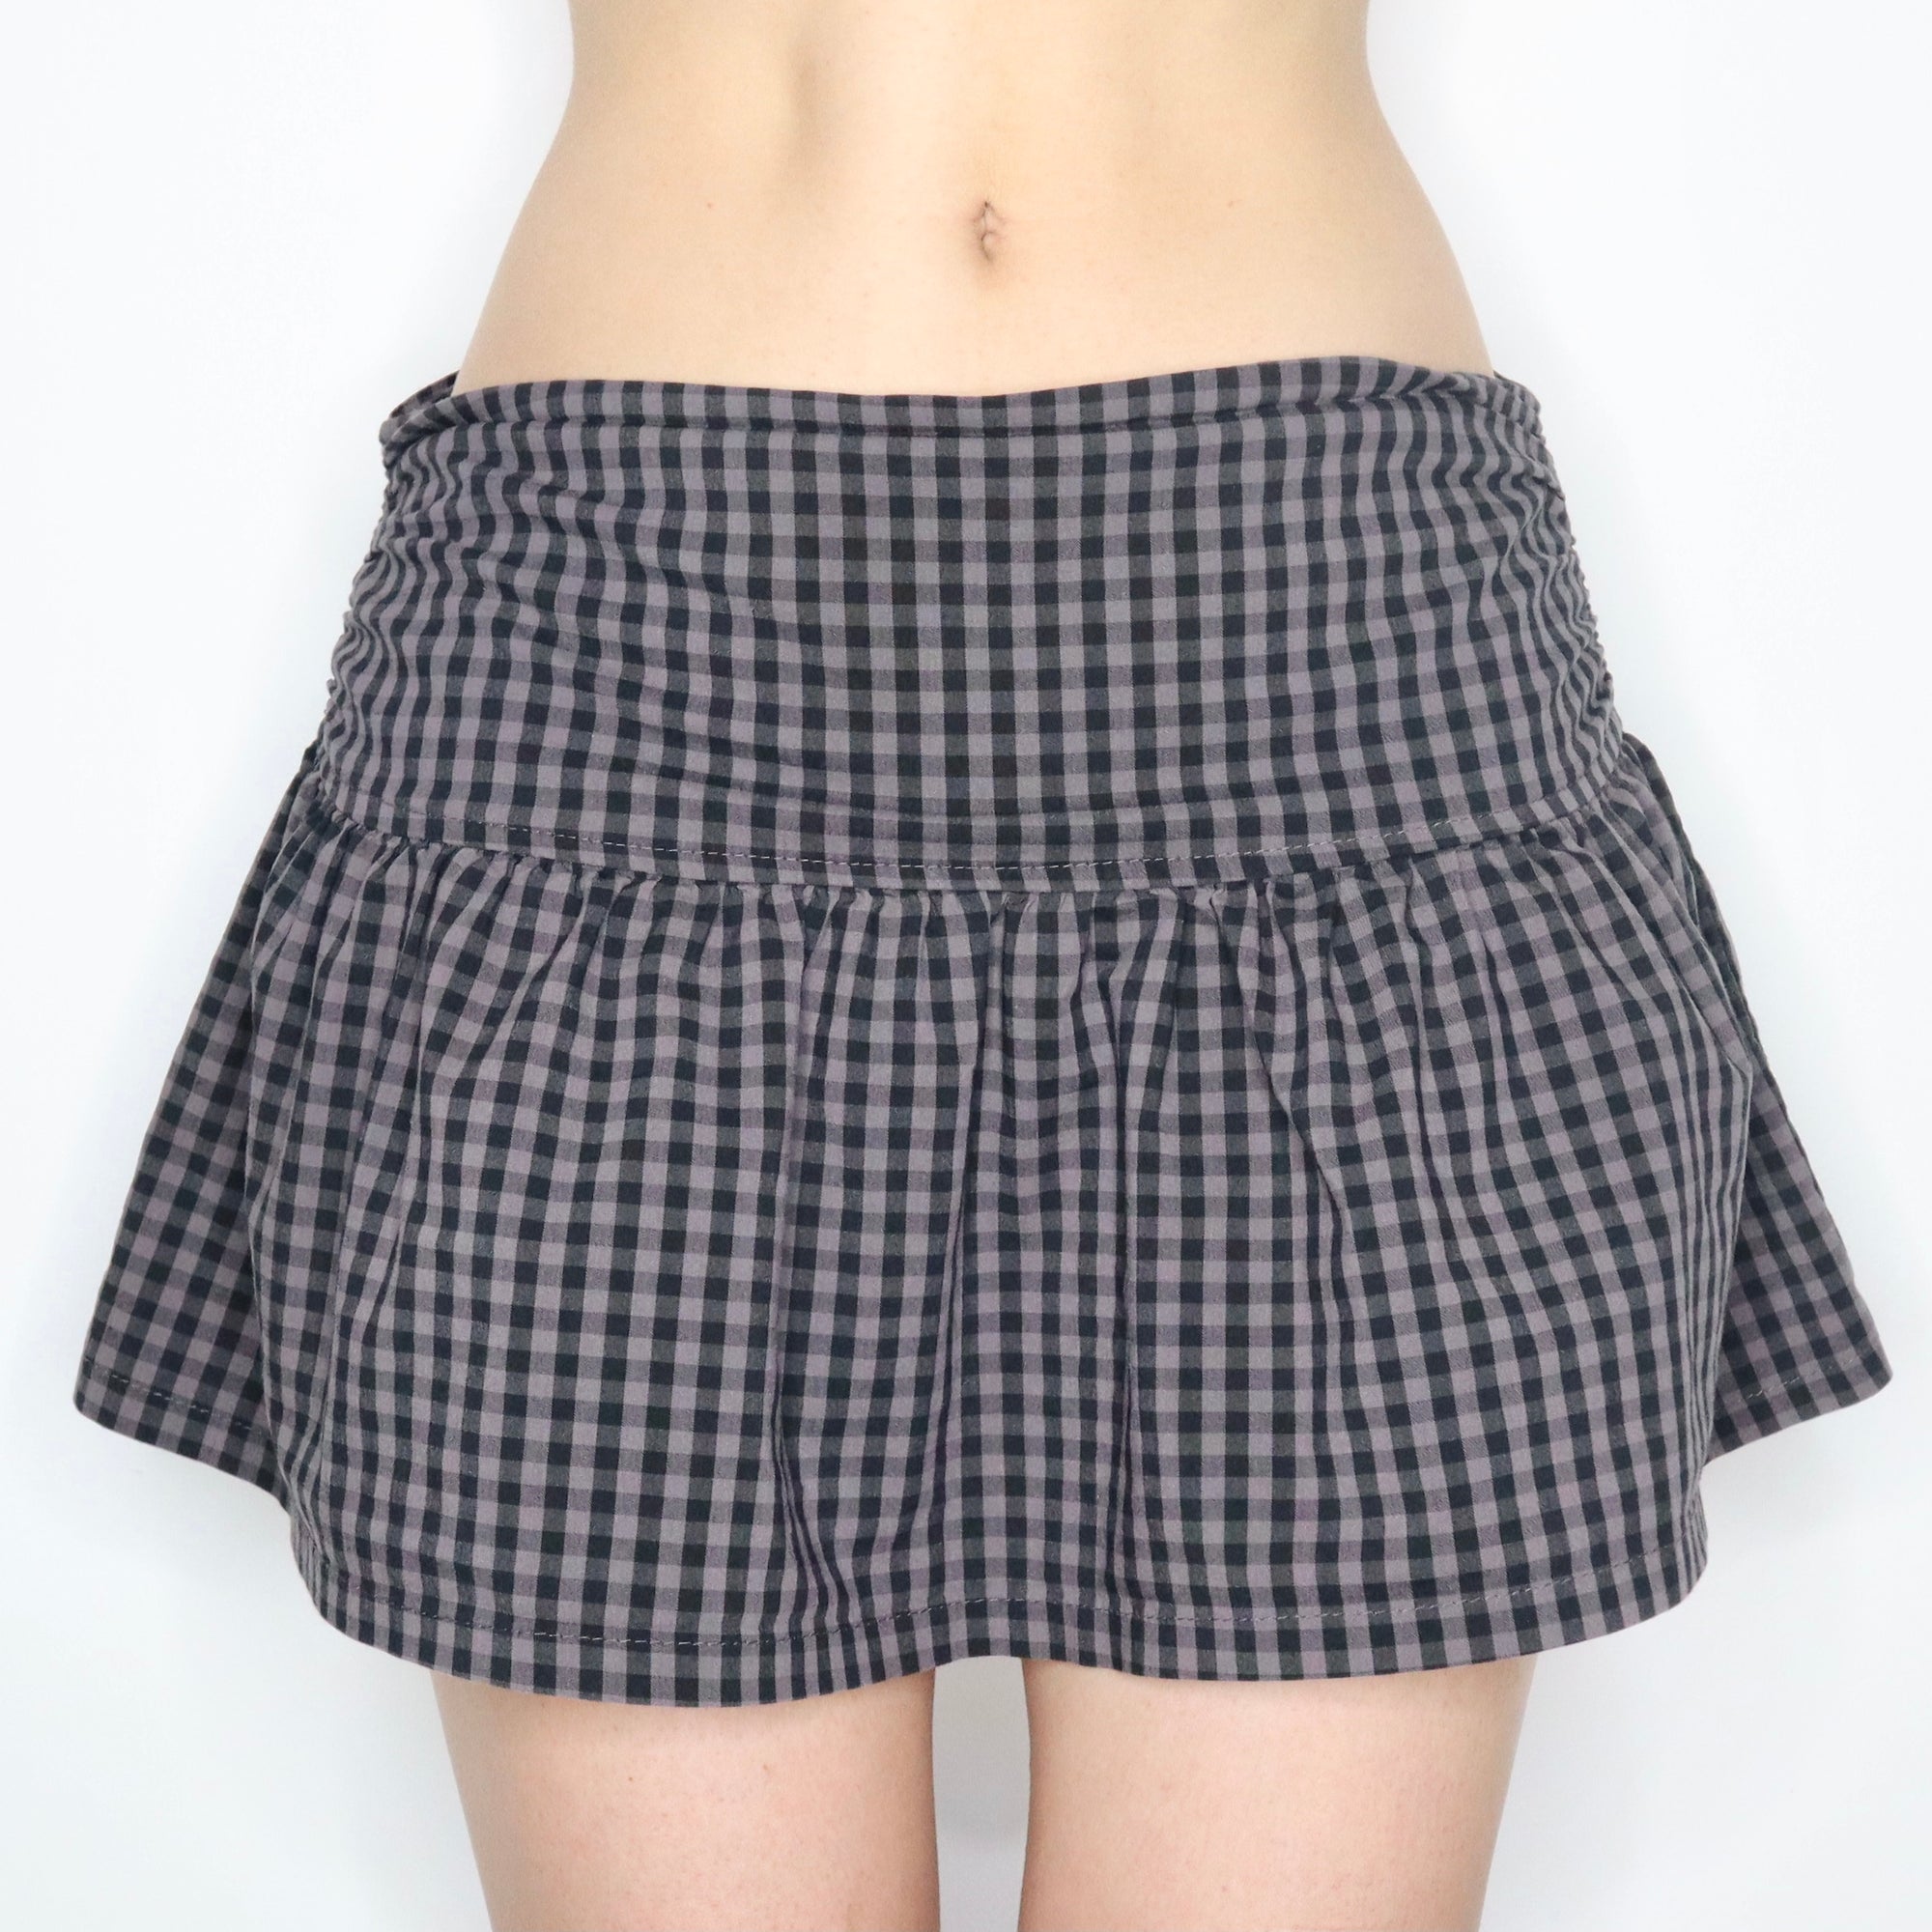 Vintage Early 2000s Black and Grey Checkered Mini Skirt